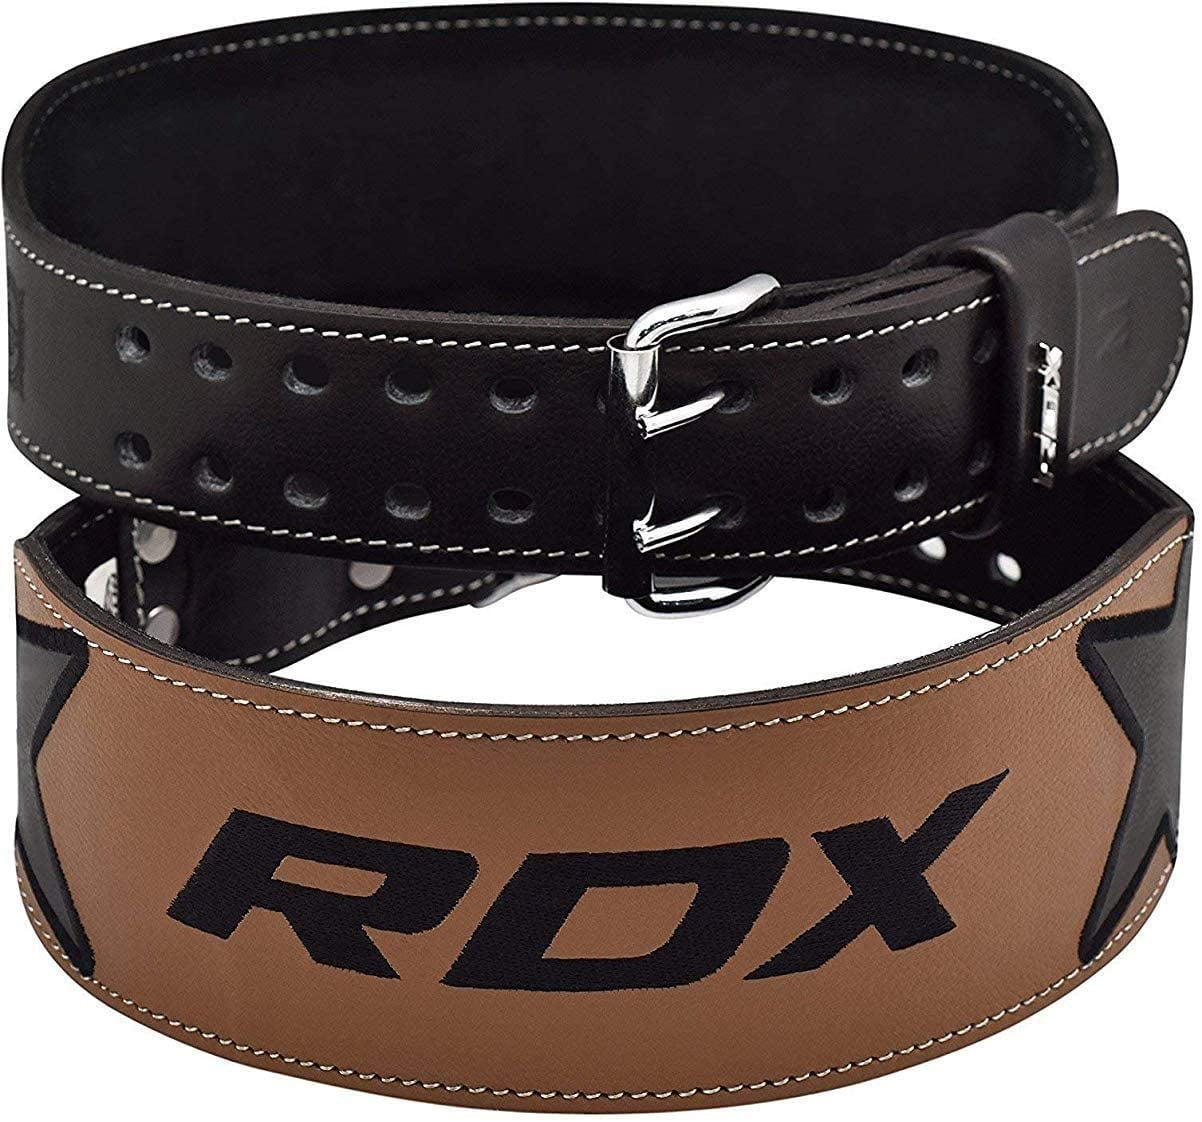 RDX Weight Lifting Belt Cow Hide Leather 6 Double Prong Back Support Training Gym Fitness Workout Exercise Bodybuilding